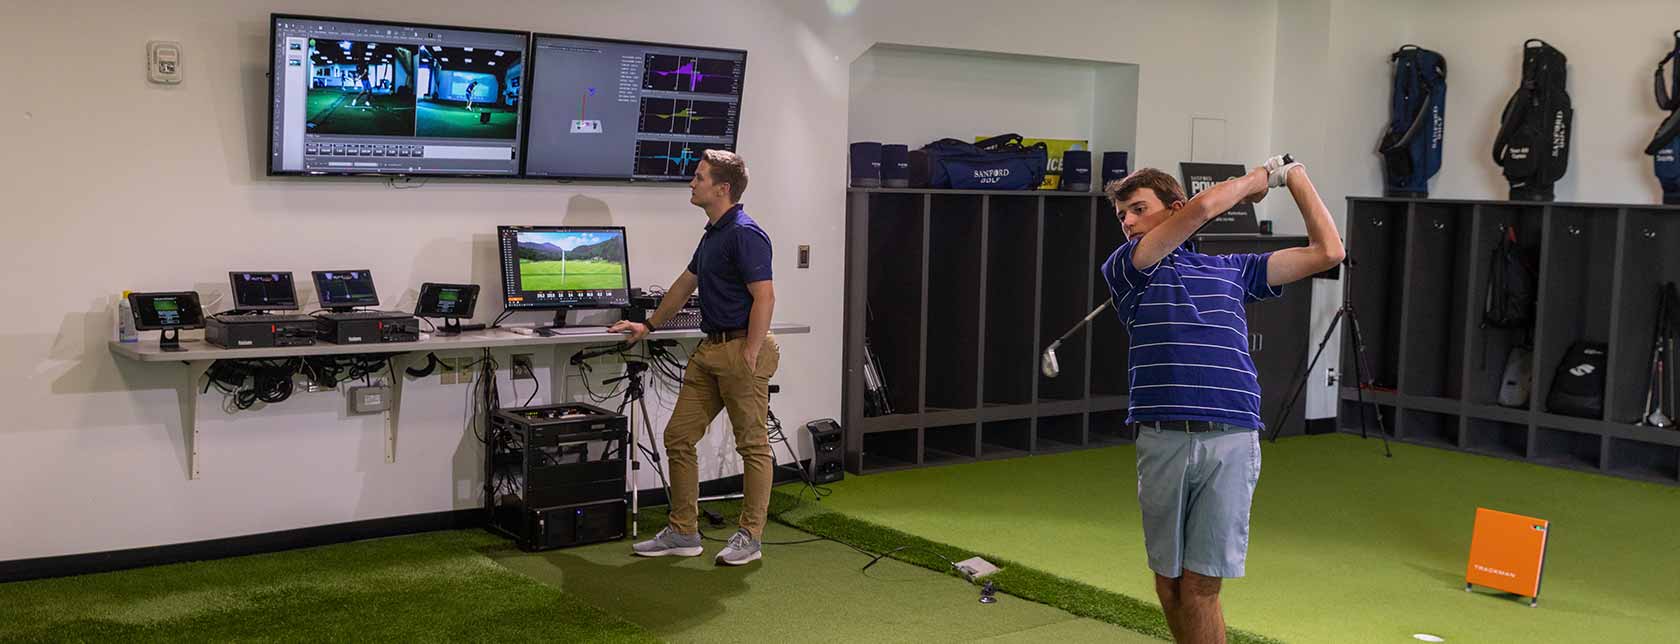 two people playing golf simulation